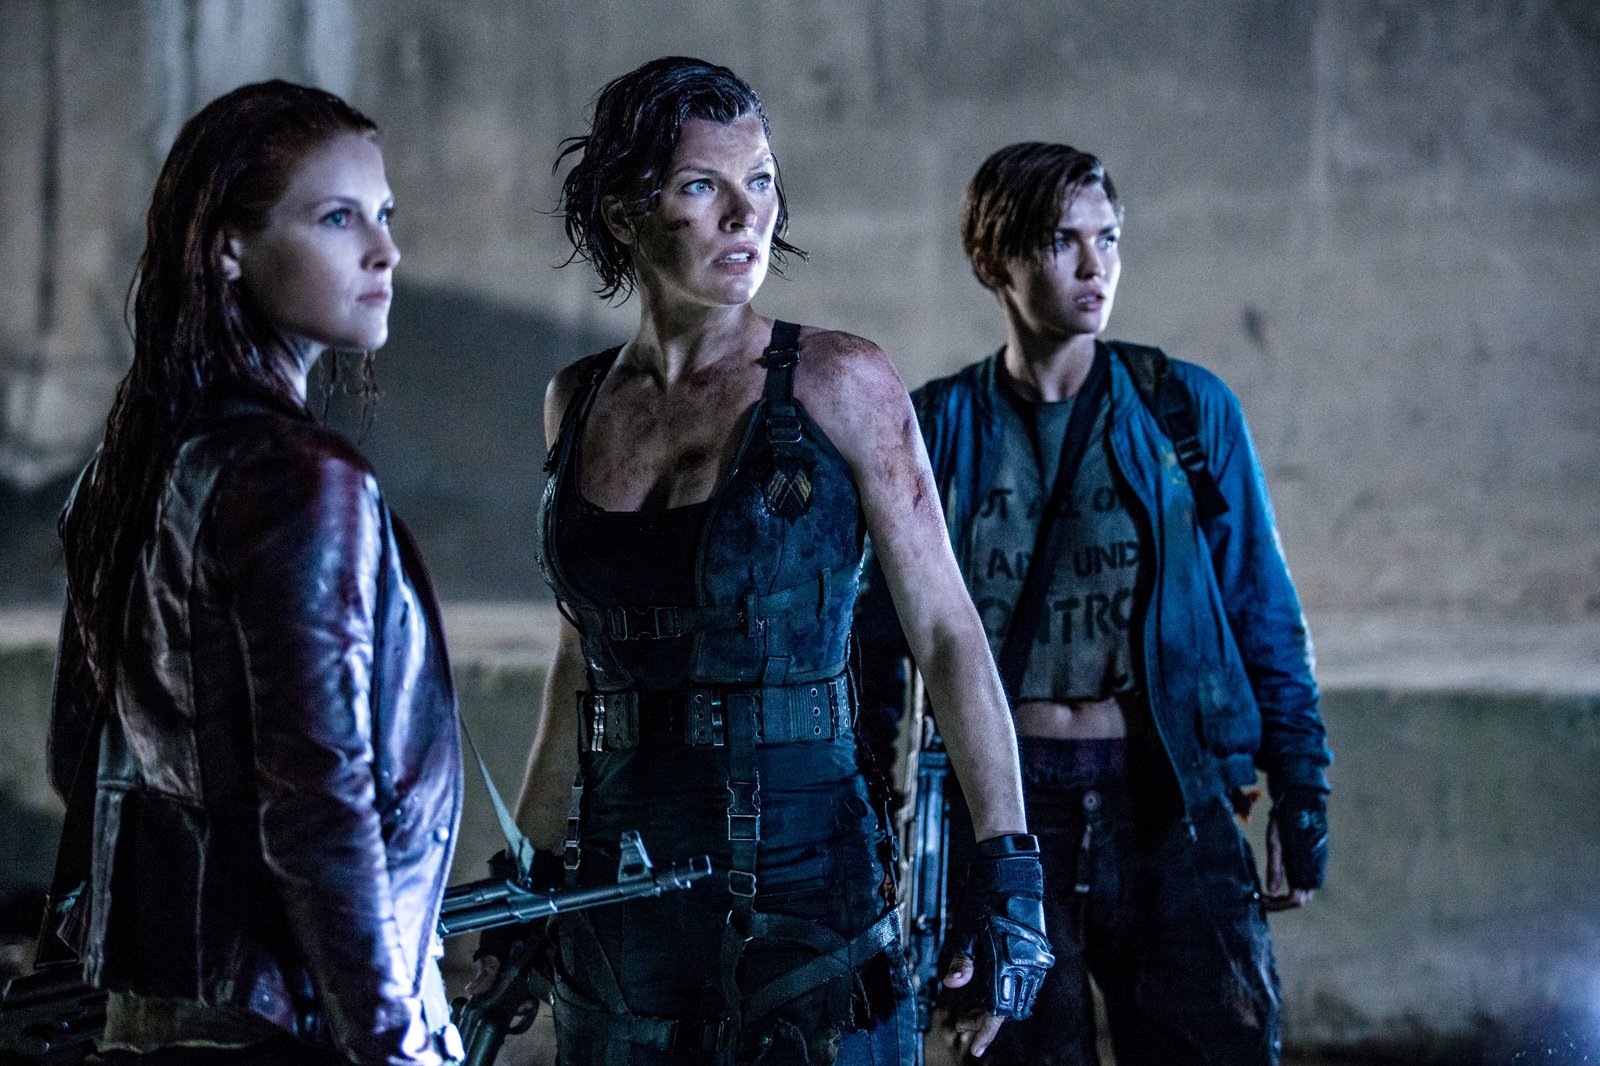 Resident Evil: The Final Chapter 3D (3D blu-ray)